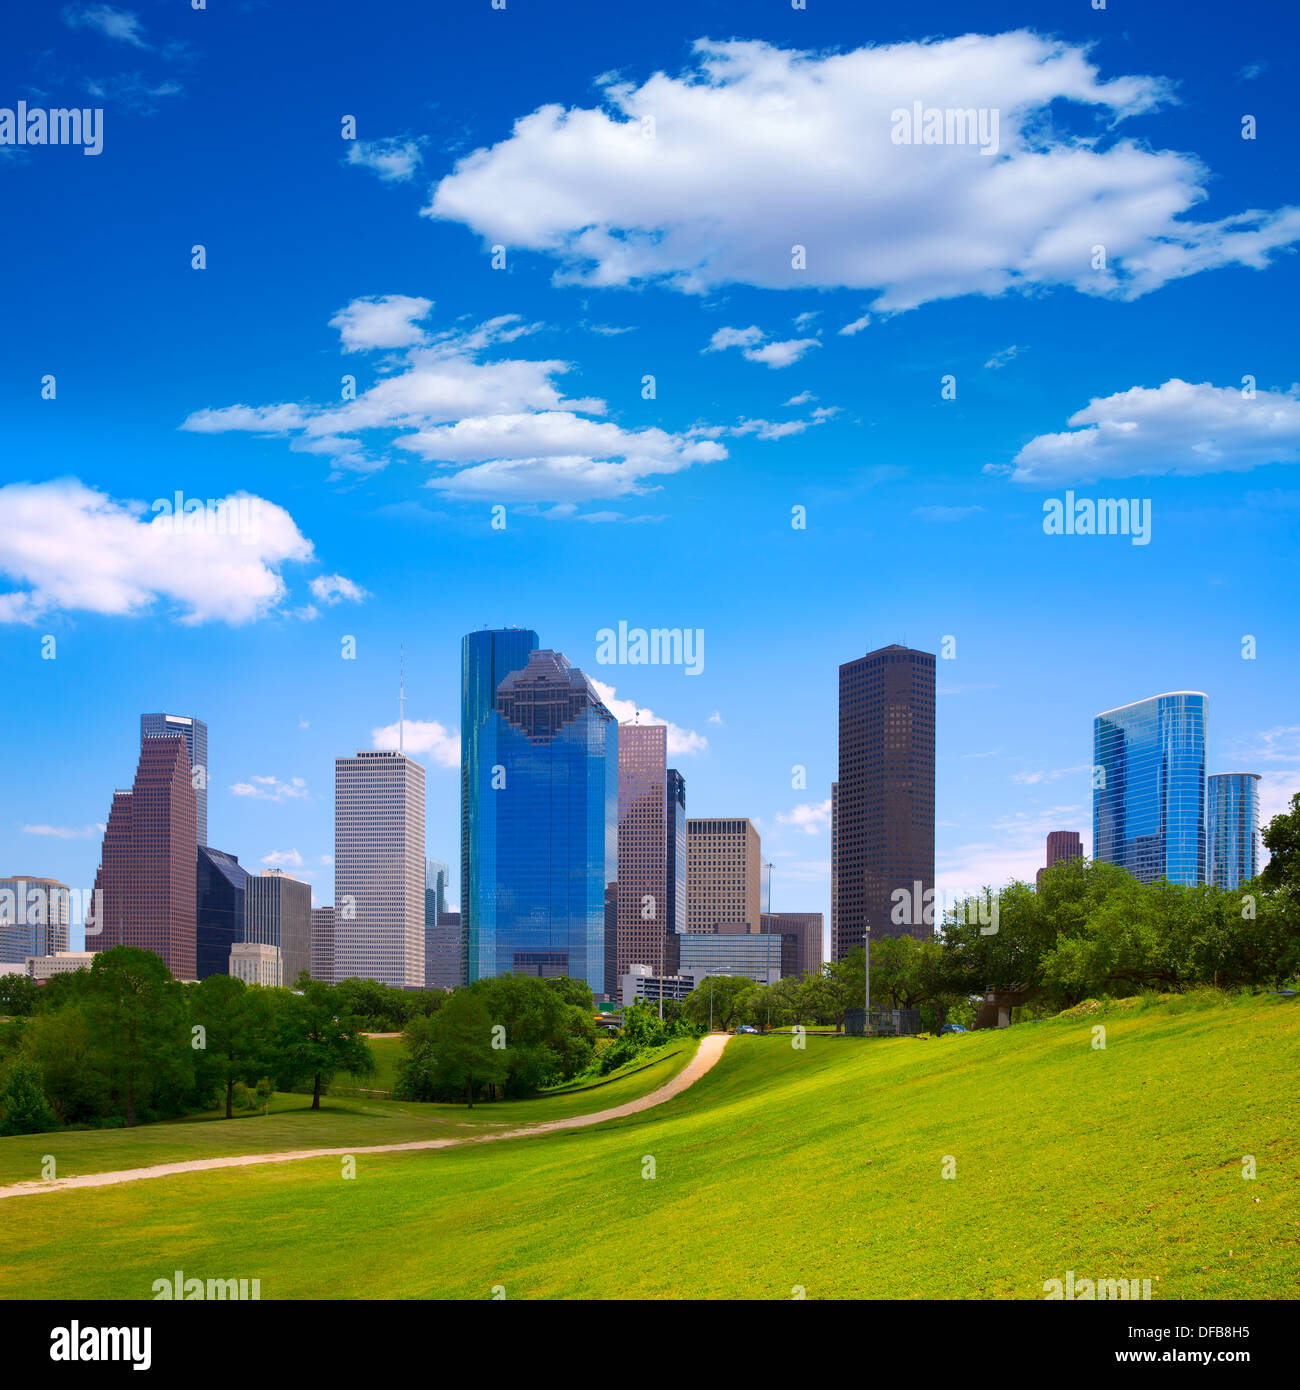 Houston Texas Skyline with modern skyscapers and blue sky view from park lawn Stock Photo